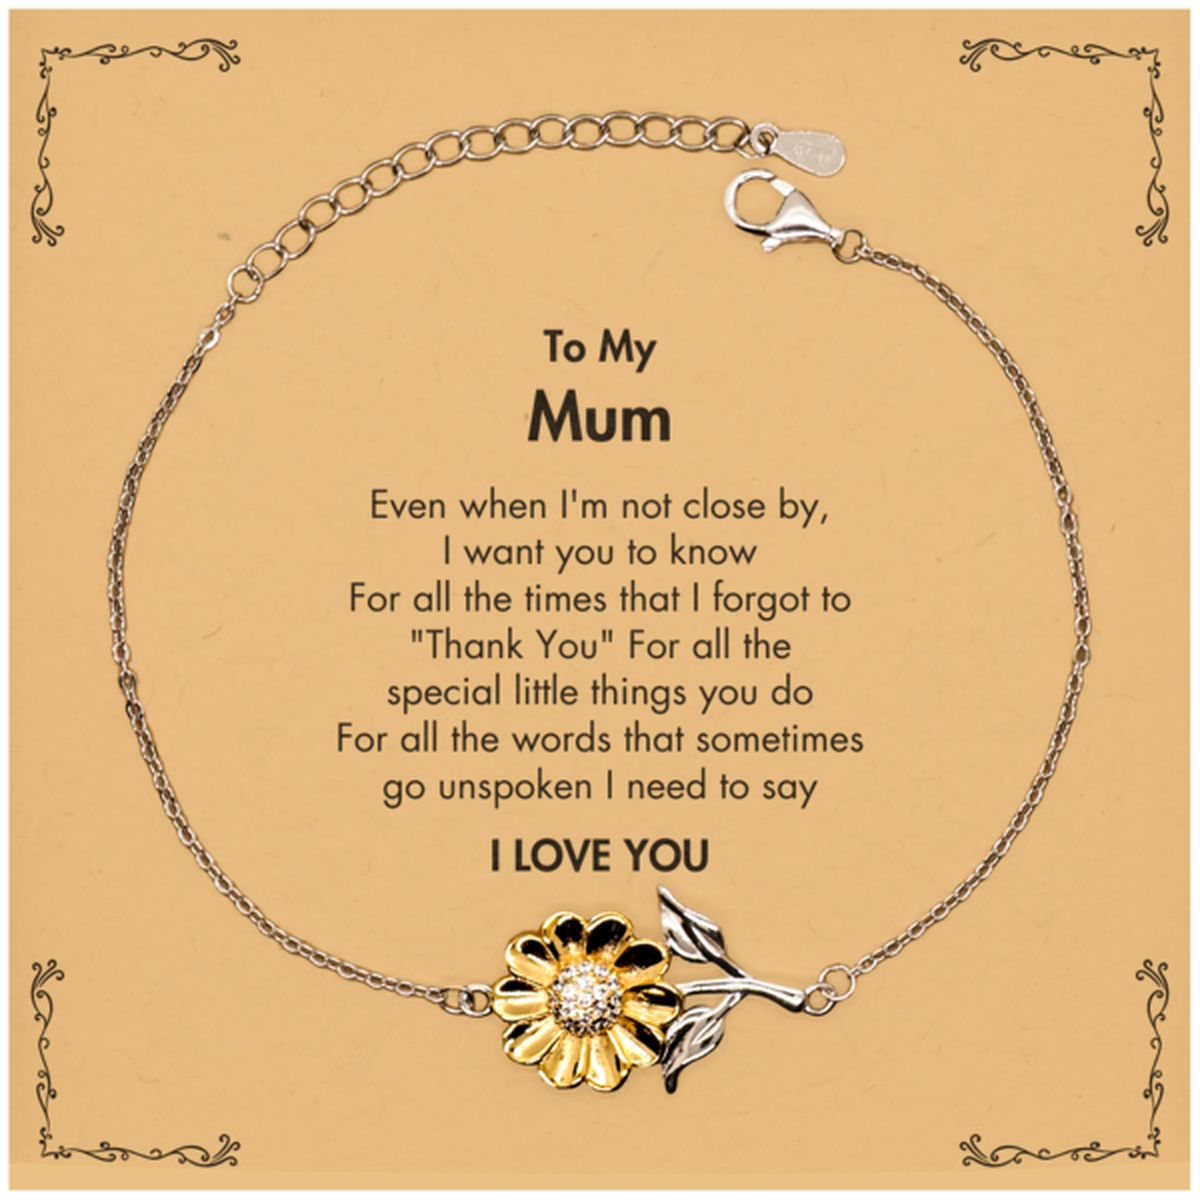 Thank You Gifts for Mum, Keepsake Sunflower Bracelet Gifts for Mum Birthday Mother's day Father's Day Mum For all the words That sometimes go unspoken I need to say I LOVE YOU